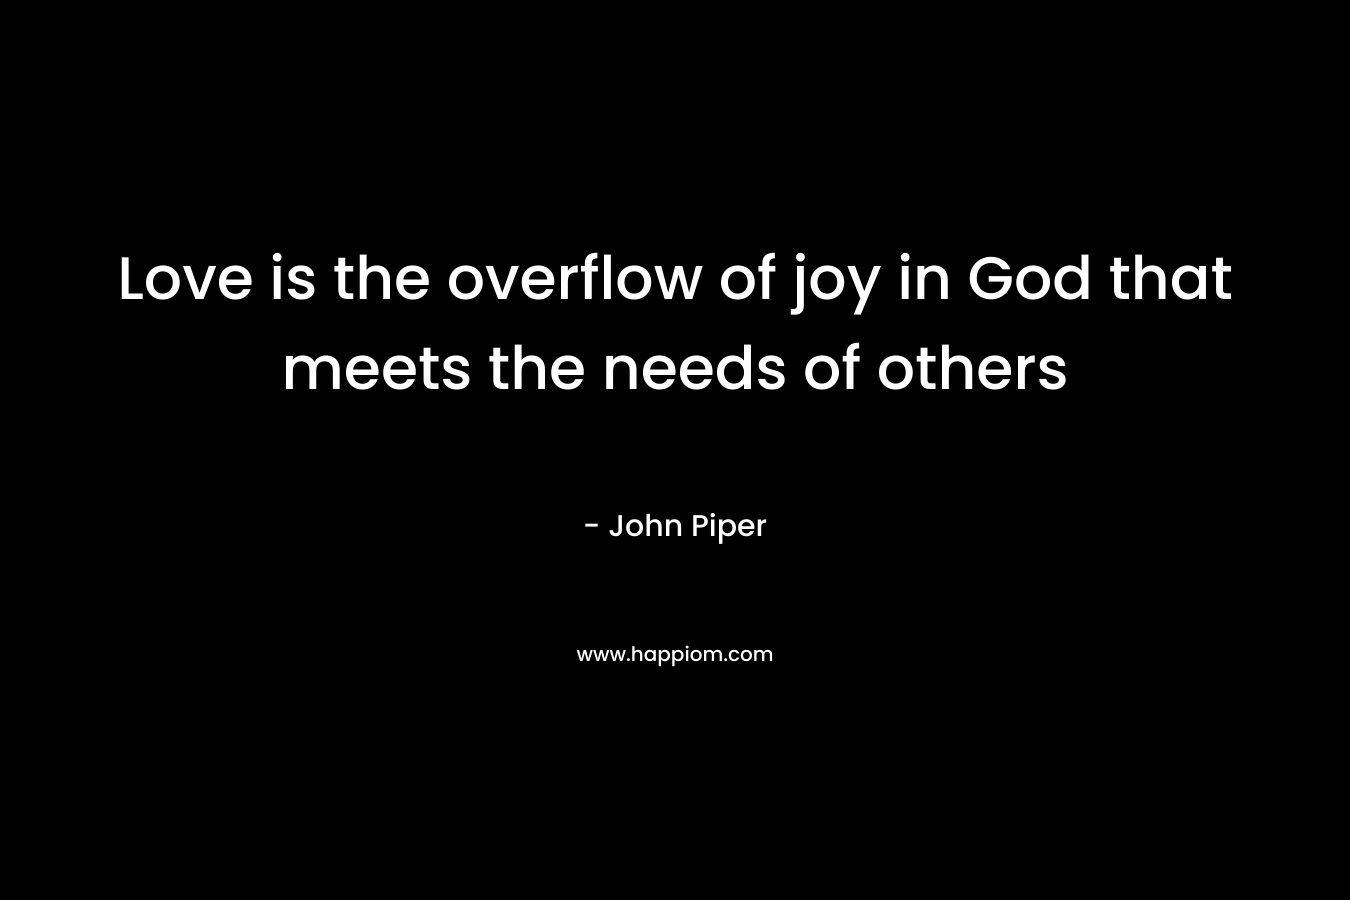 Love is the overflow of joy in God that meets the needs of others